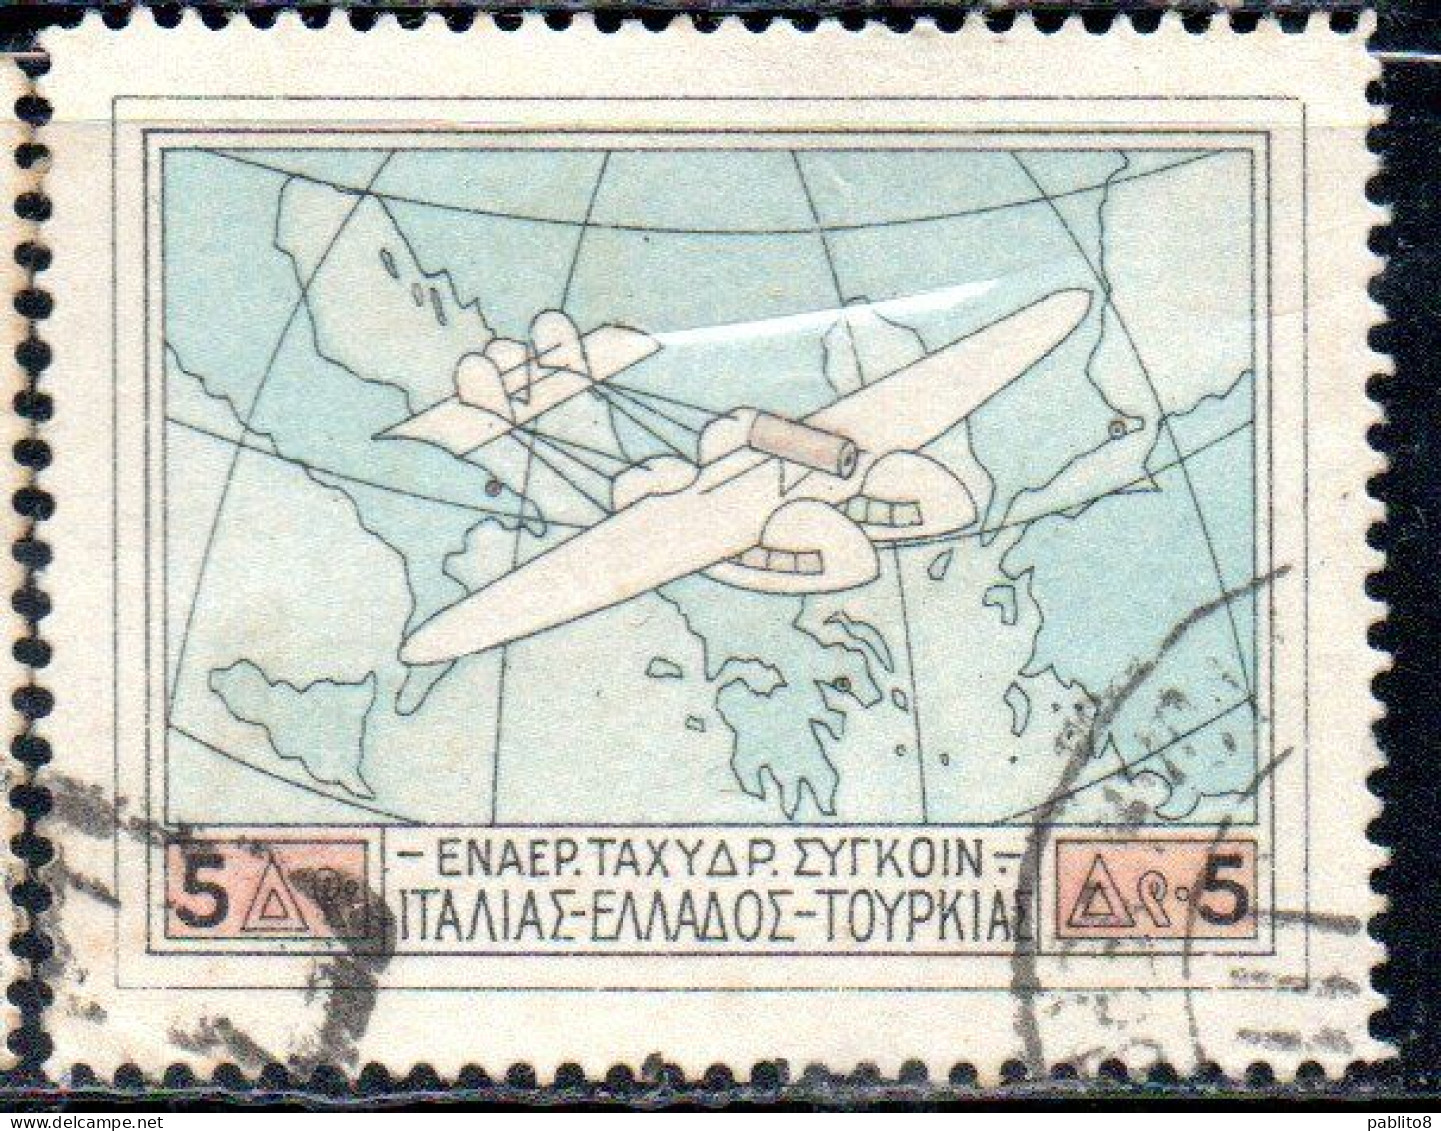 GREECE GRECIA ELLAS 1926 AIR POST MAIL AIRMAIL ITALY-TURKEY-RHODES SERVICE FLYING BOAT OVER MAP SOUTHERN EUROPA 5d USED - Usati